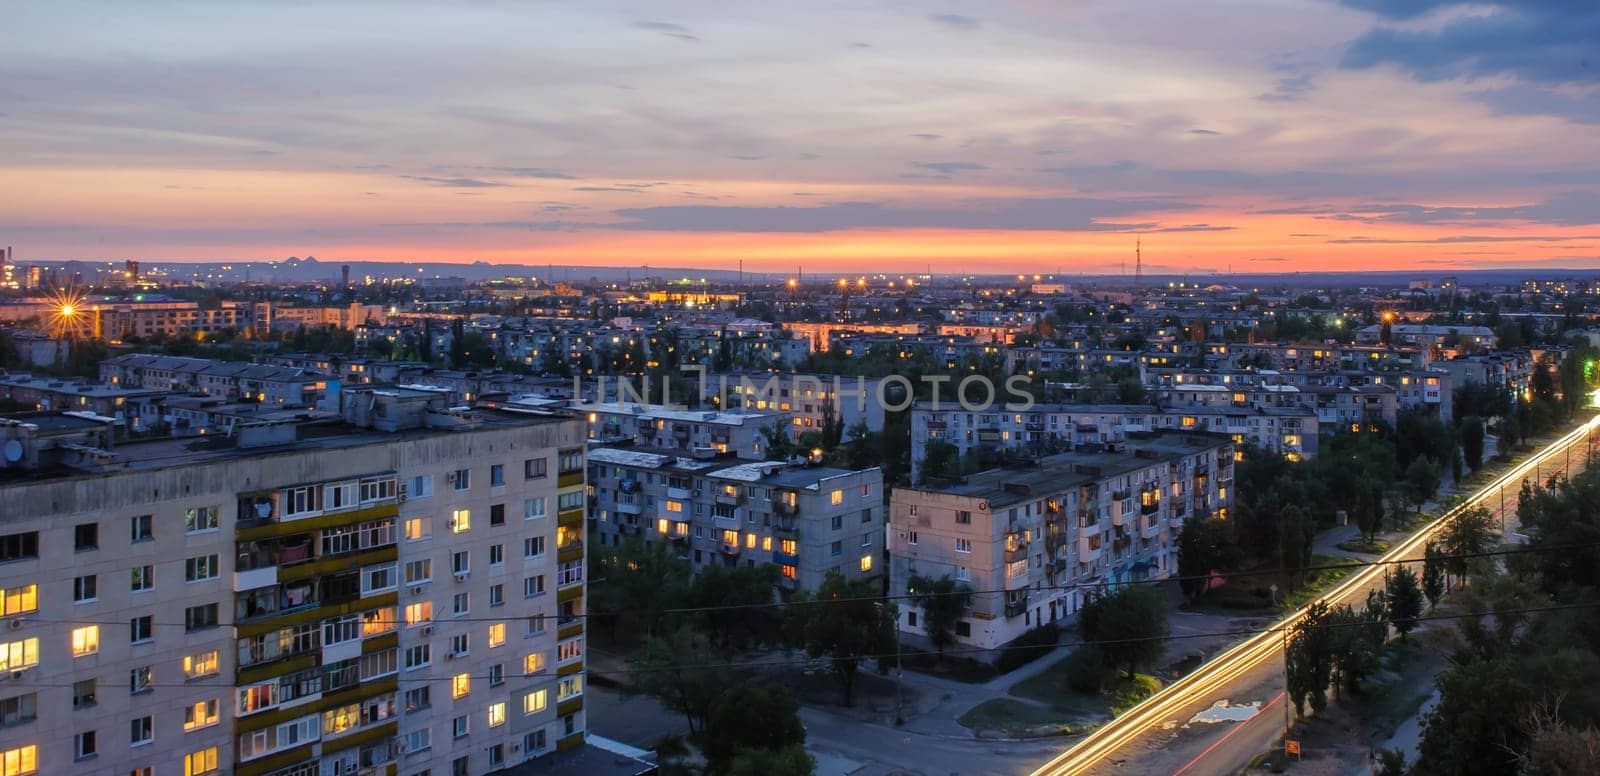 evening view of Severodonetsk before the war with Russia 2